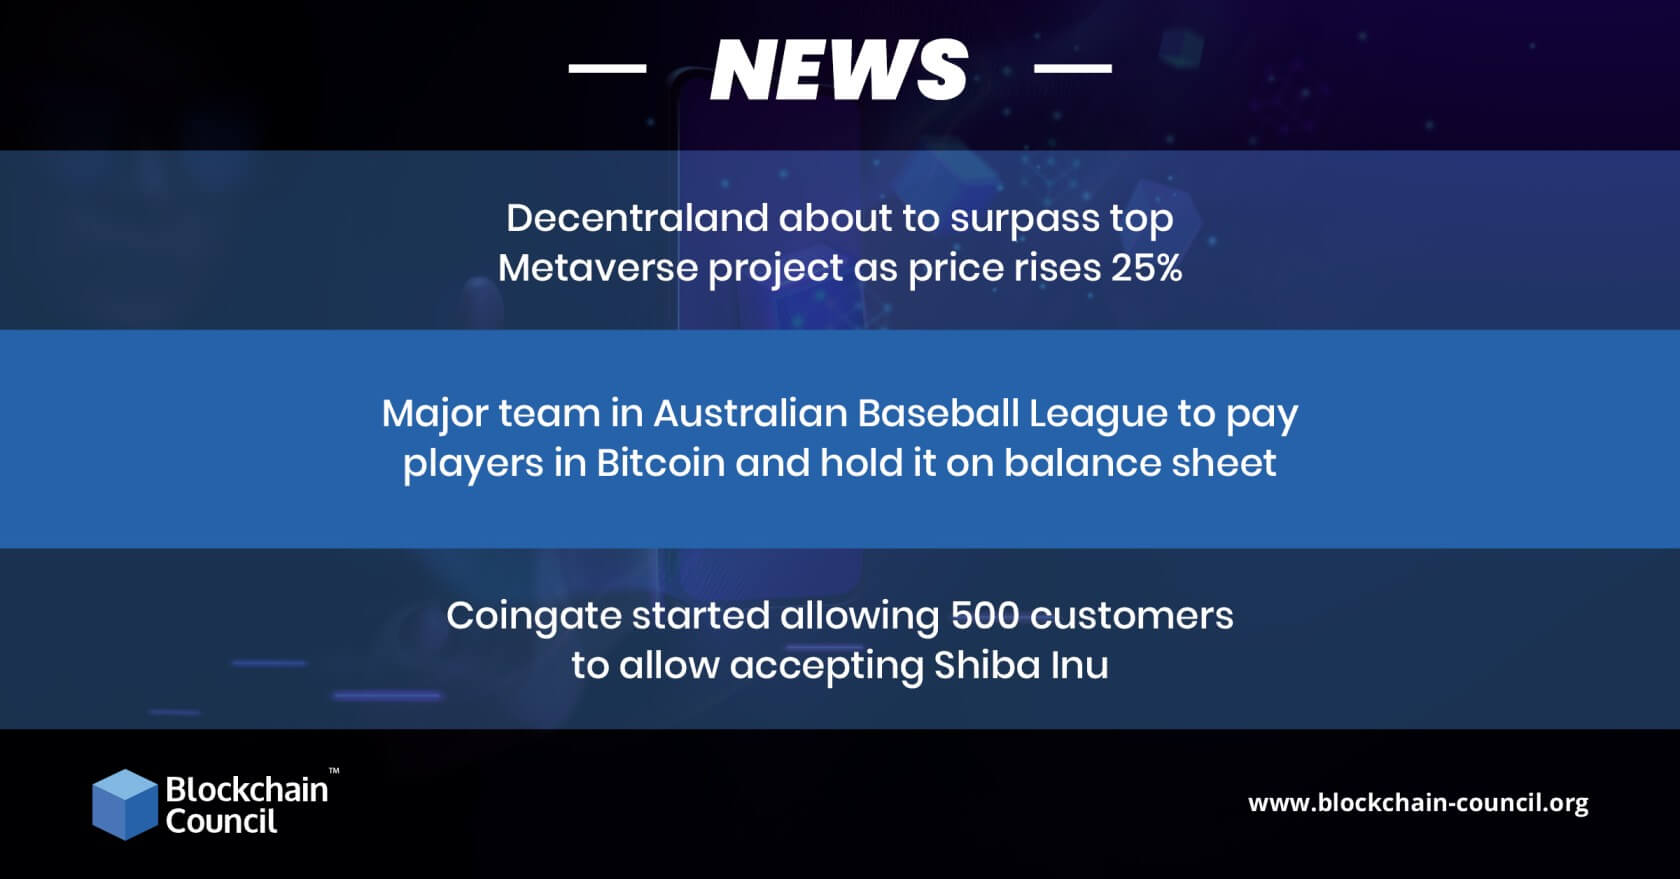 Decentraland about to surpass top Metaverse project as price rises 25% (1) (1)